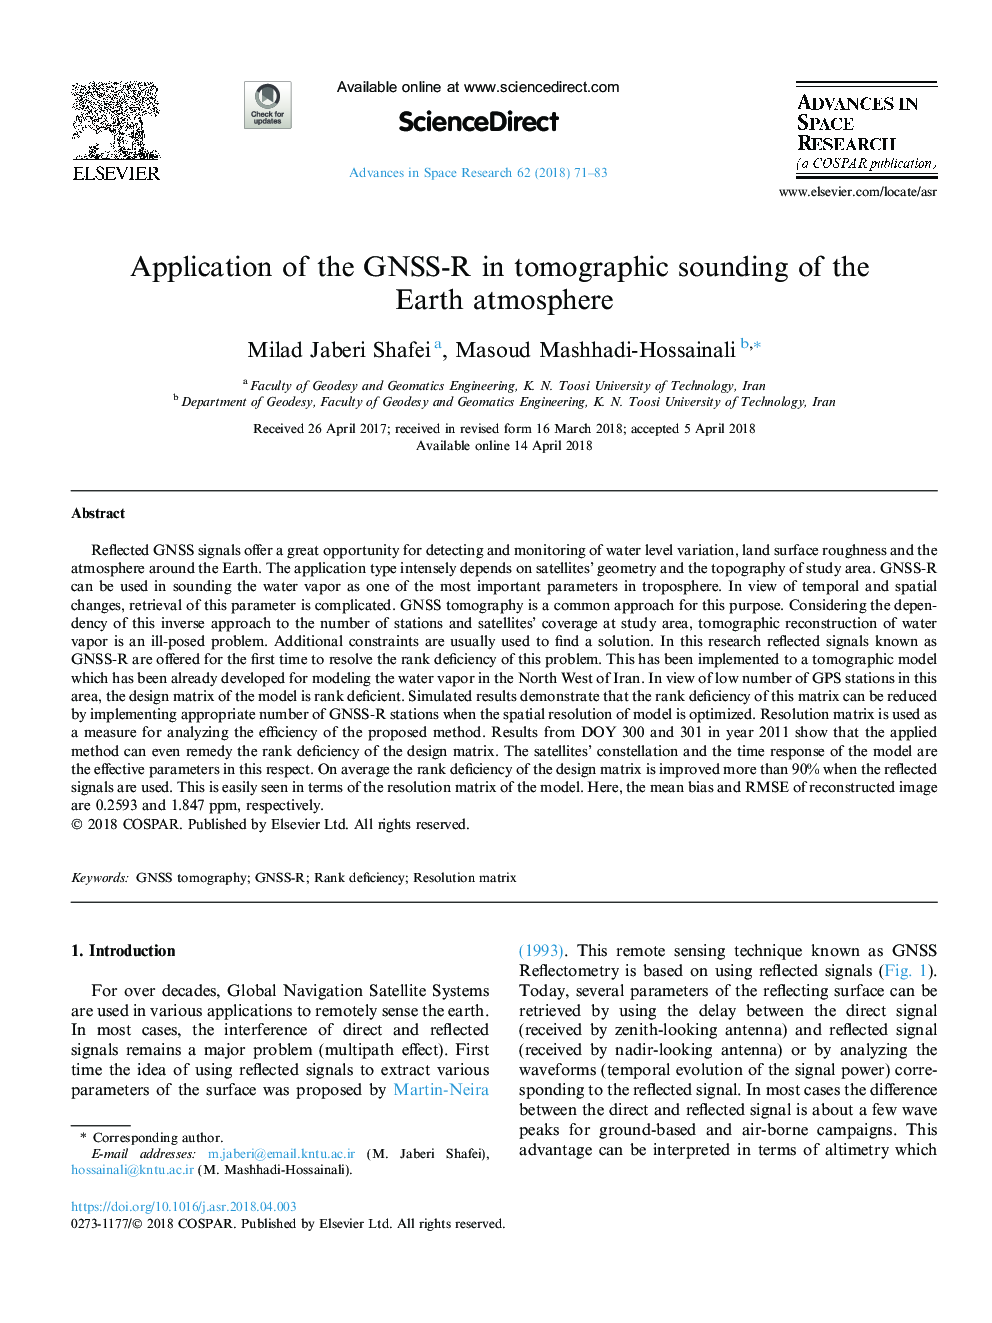 Application of the GNSS-R in tomographic sounding of the Earth atmosphere